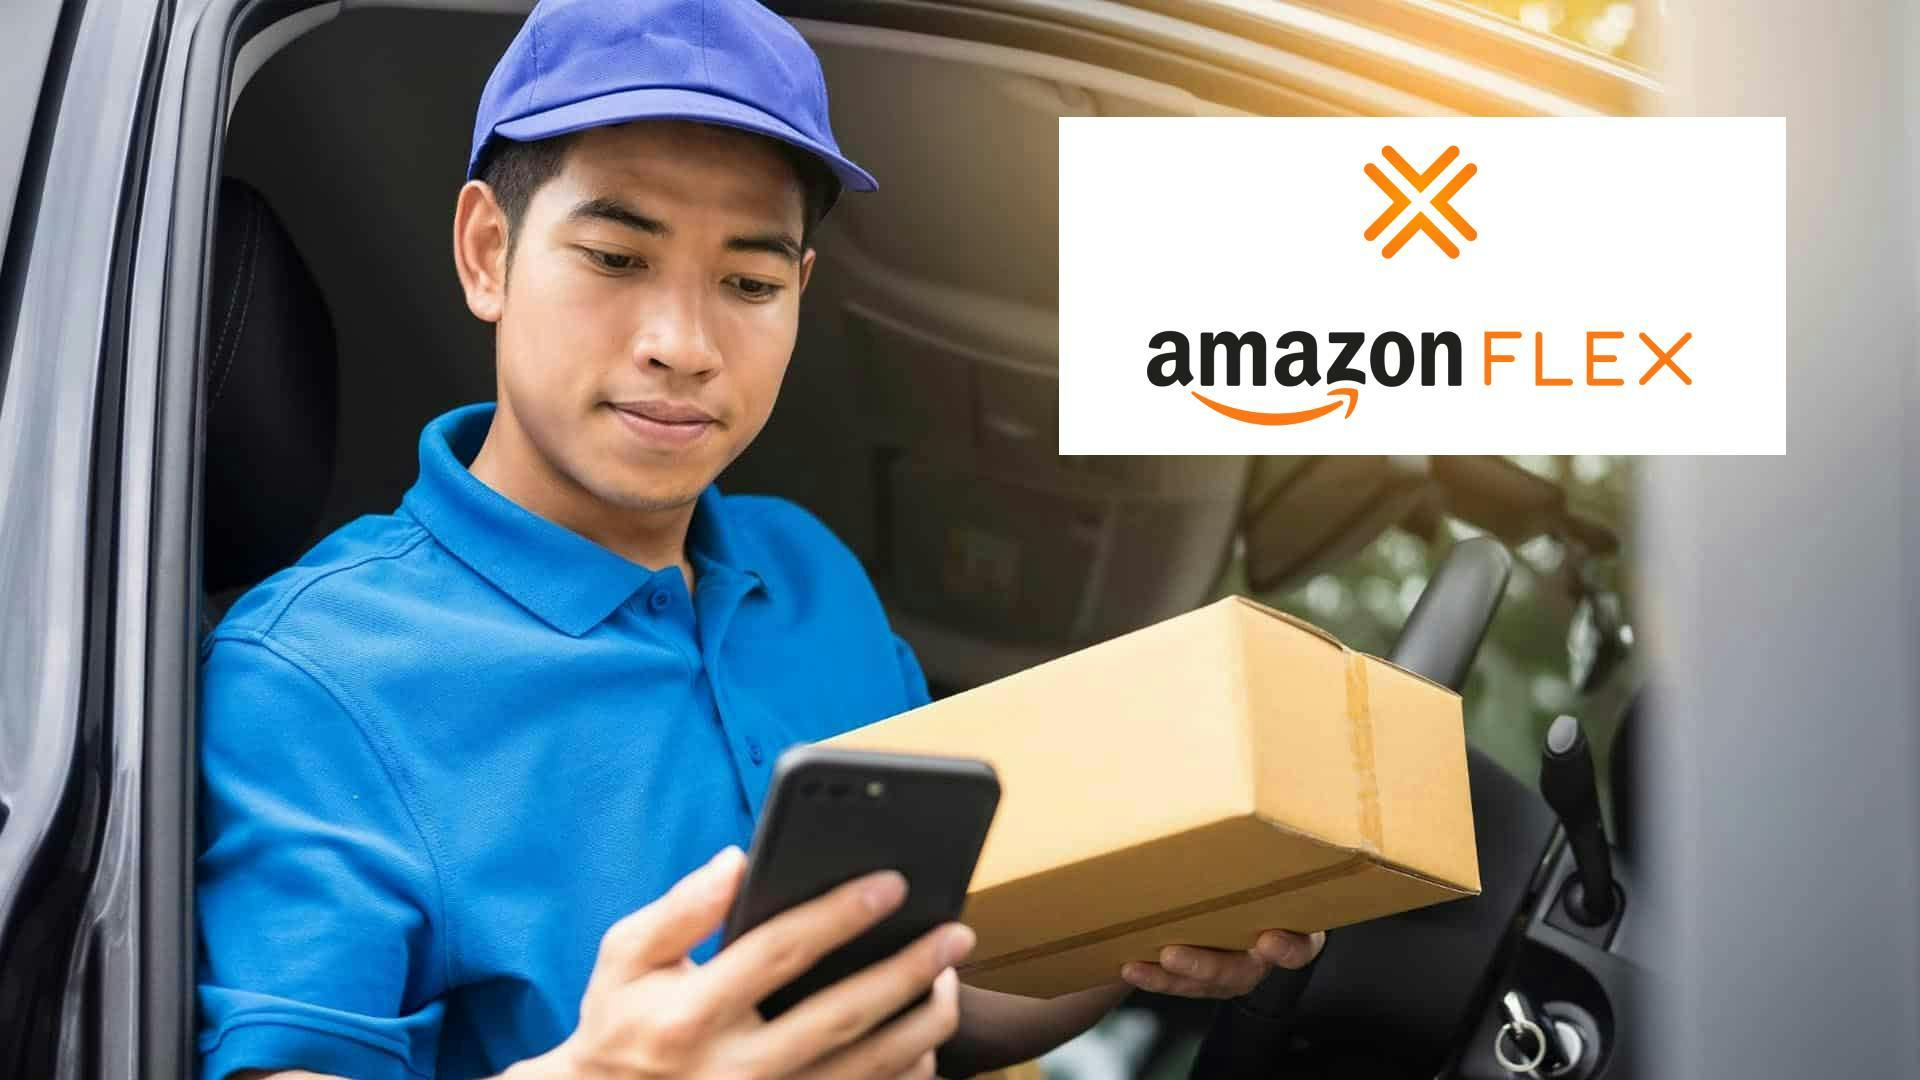 Thousands of Amazon Flex Drivers File Claims Over Misclassification as Independent Contractors